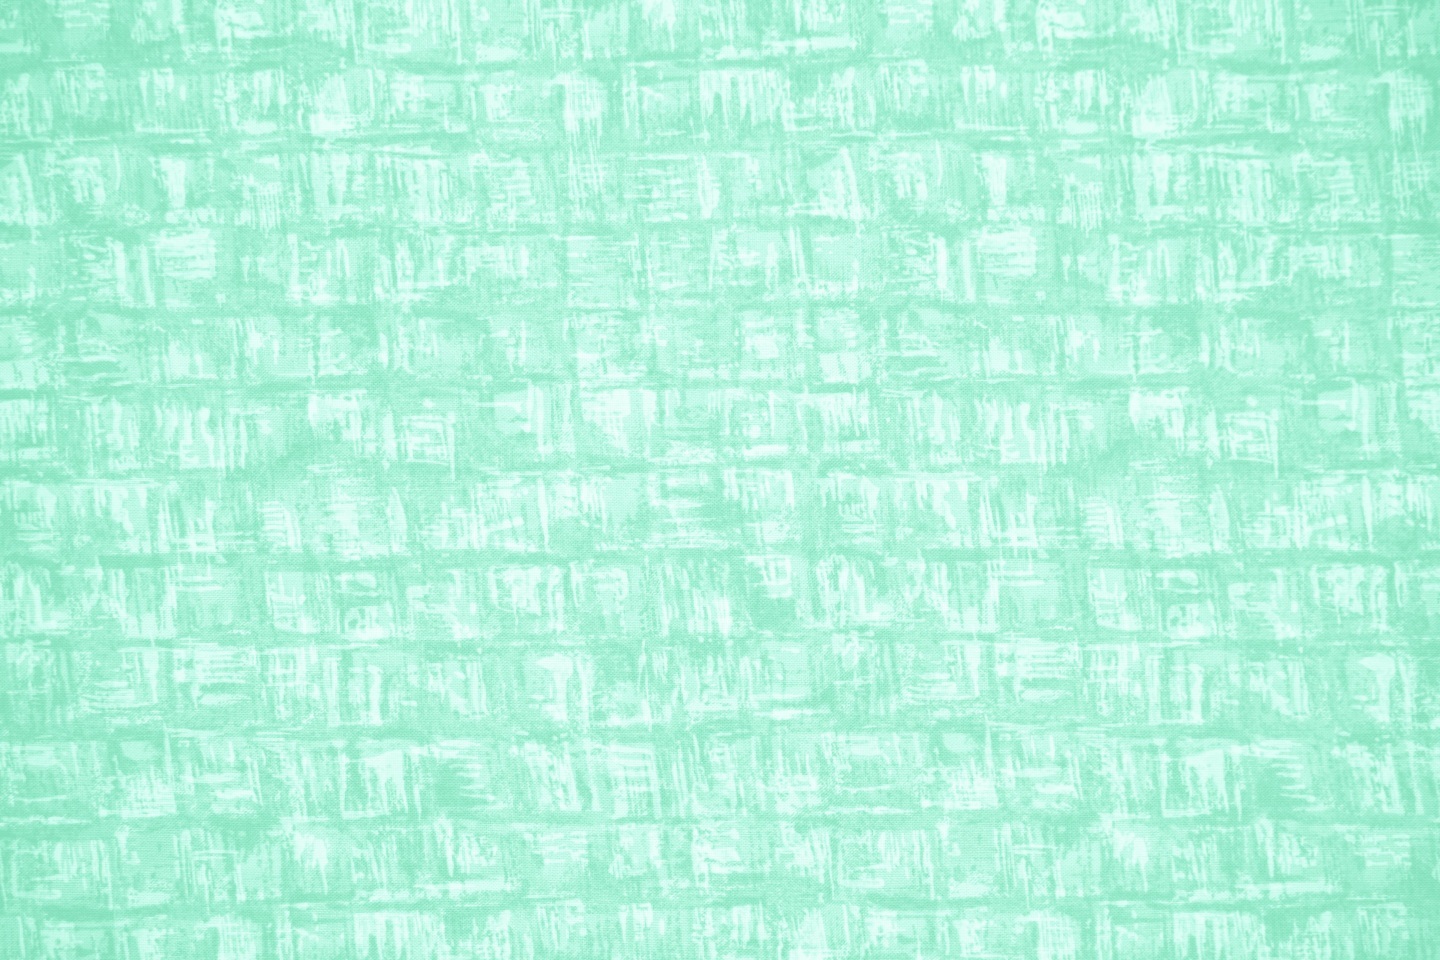 Mint Green Abstract Squares Fabric Texture Papel De Parede